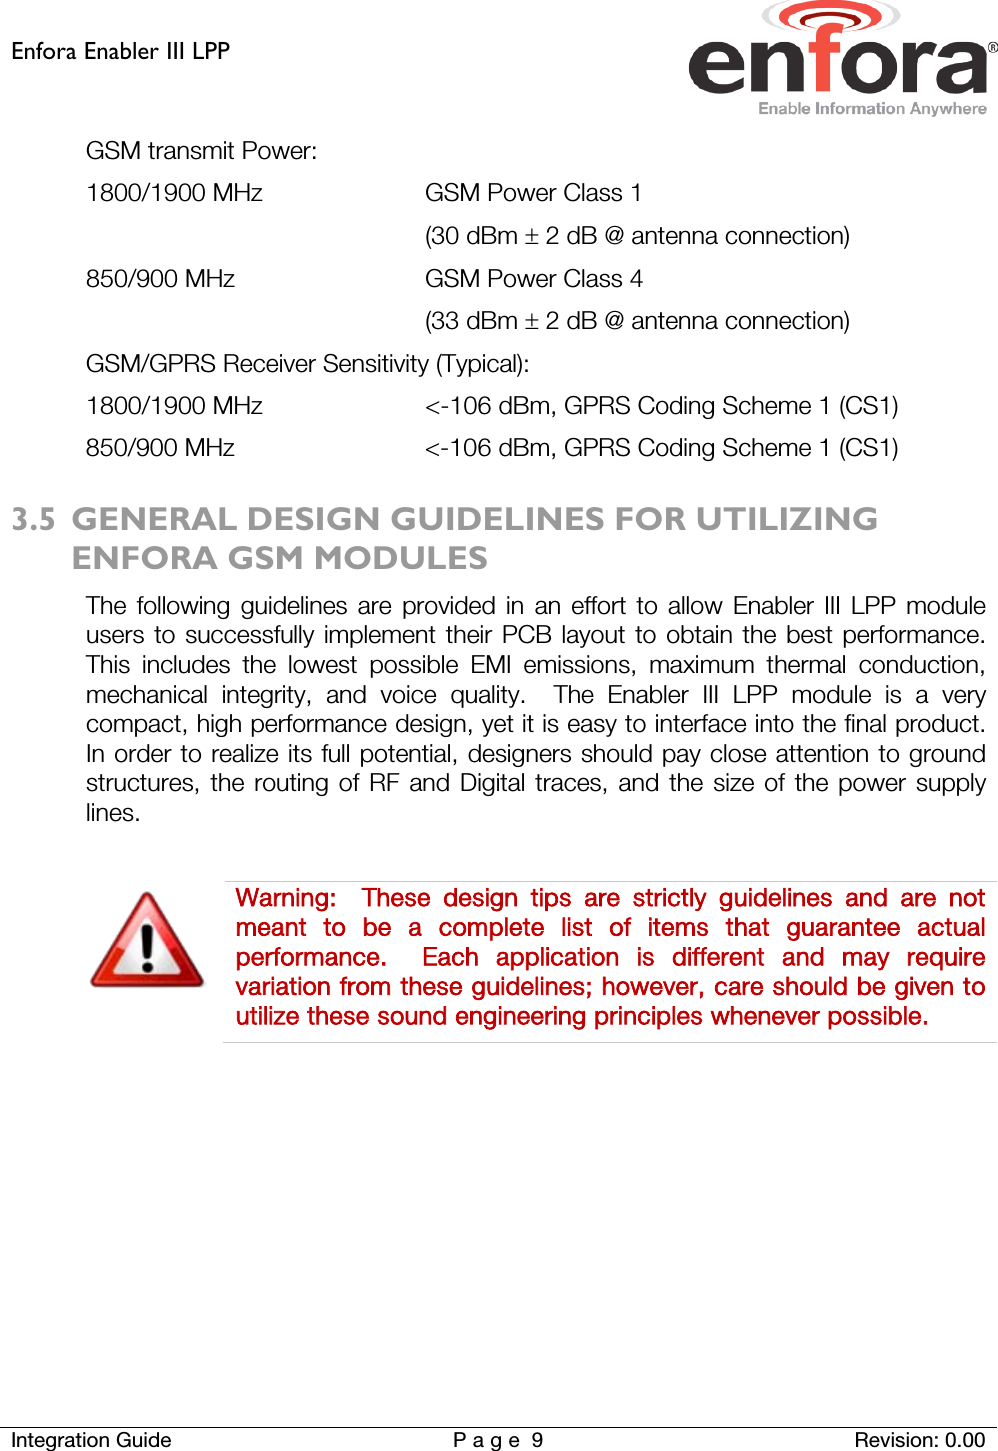 Enfora Enabler III LPP    Integration Guide Page 9  Revision: 0.00  GSM transmit Power: 1800/1900 MHz GSM Power Class 1  (30 dBm ± 2 dB @ antenna connection) 850/900 MHz GSM Power Class 4  (33 dBm ± 2 dB @ antenna connection) GSM/GPRS Receiver Sensitivity (Typical): 1800/1900 MHz  &lt;-106 dBm, GPRS Coding Scheme 1 (CS1) 850/900 MHz  &lt;-106 dBm, GPRS Coding Scheme 1 (CS1) 3.5 GENERAL DESIGN GUIDELINES FOR UTILIZING ENFORA GSM MODULES The following guidelines are provided in an effort to allow Enabler III LPP module users to successfully implement their PCB layout to obtain the best performance.  This includes the lowest possible EMI emissions, maximum thermal conduction, mechanical integrity, and voice quality.  The Enabler III LPP module is a very compact, high performance design, yet it is easy to interface into the final product.  In order to realize its full potential, designers should pay close attention to ground structures, the routing of RF and Digital traces, and the size of the power supply lines.   Warning:   These design tips are strictly guidelines and are not meant to be a complete list of items that guarantee actual performance.  Each application is different and may require variation from these guidelines; however, care should be given to utilize these sound engineering principles whenever possible.    